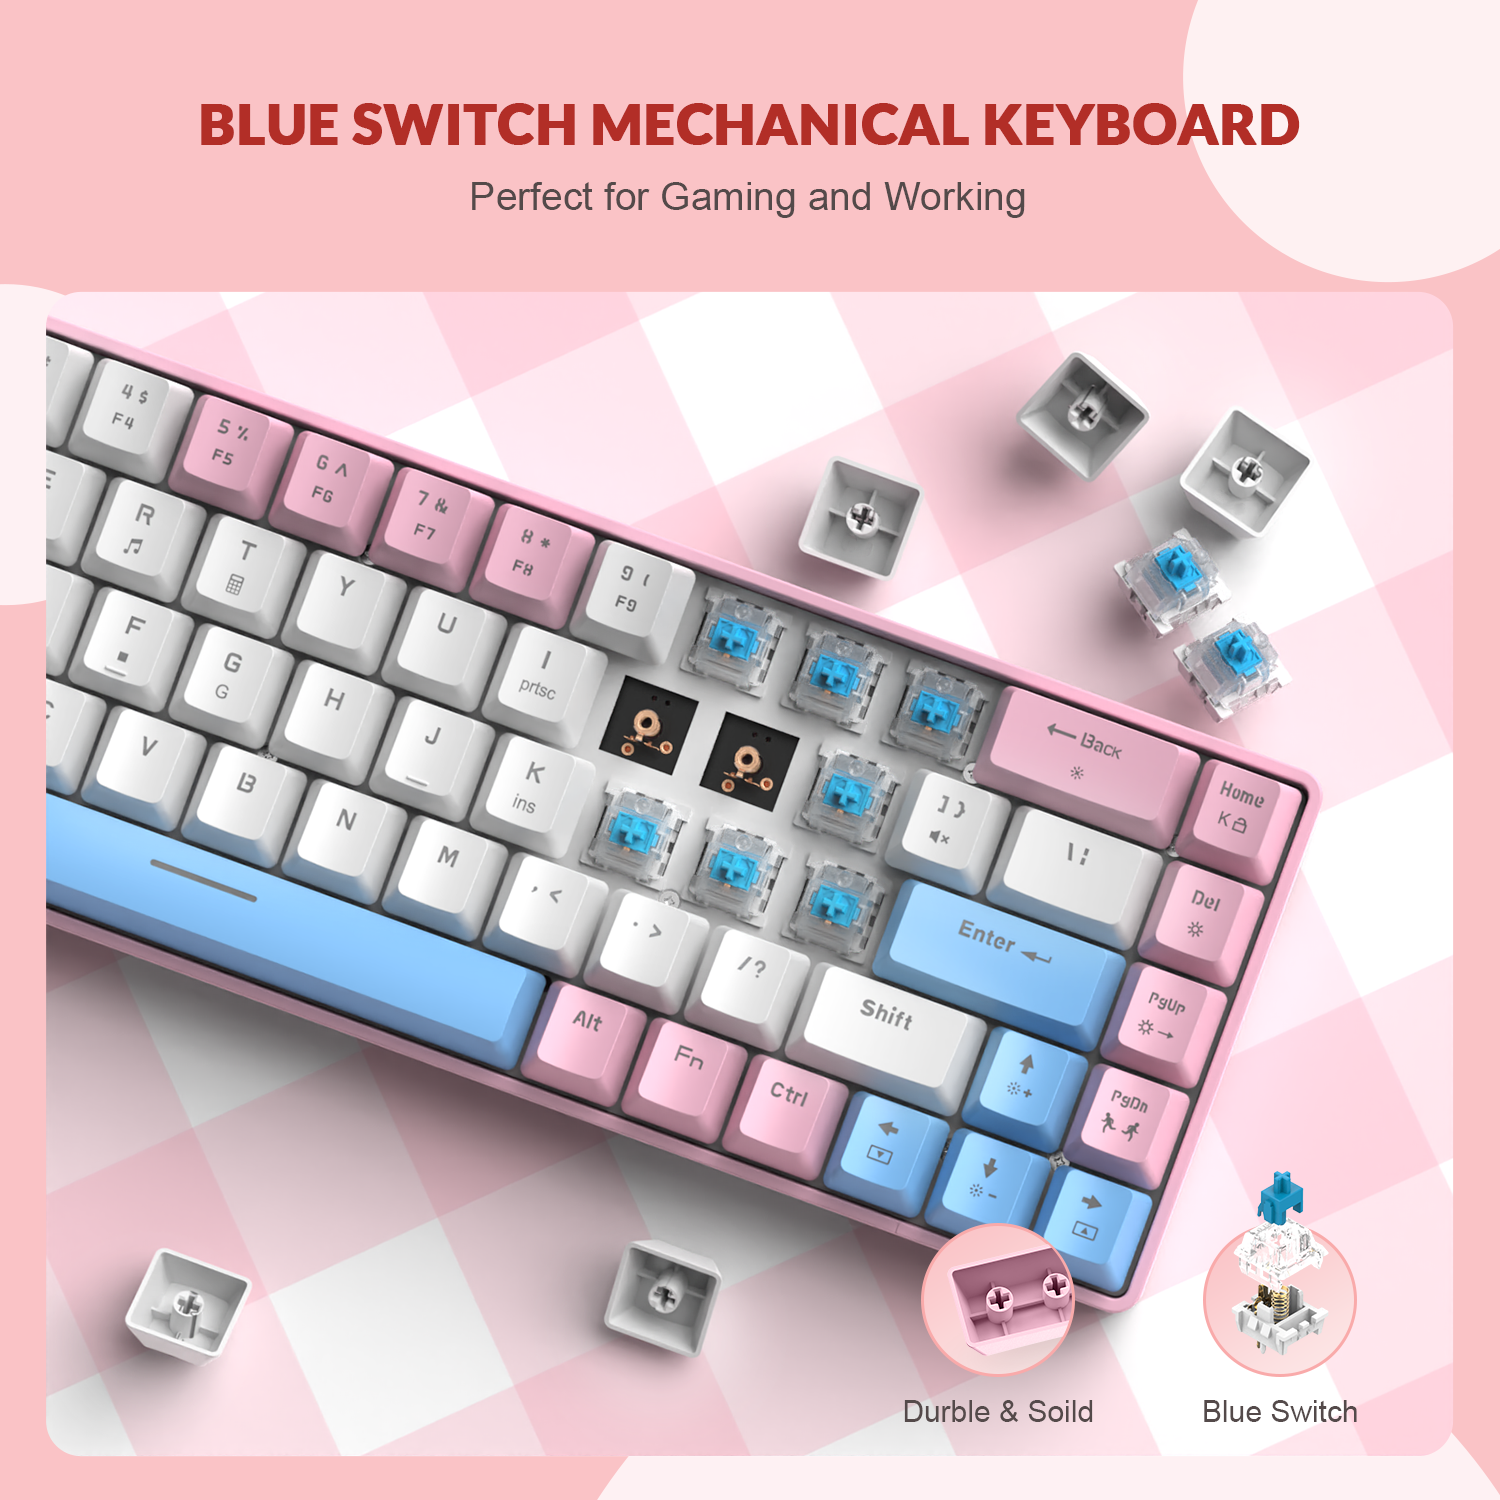 ZIYOULANG T8 60% Gaming Keyboard,68 Keys Compact Mini Wired Mechanical Keyboard with 18 Chroma RGB Backlit,Blue Switch,USB C Coiled Keyboard Cable for PC